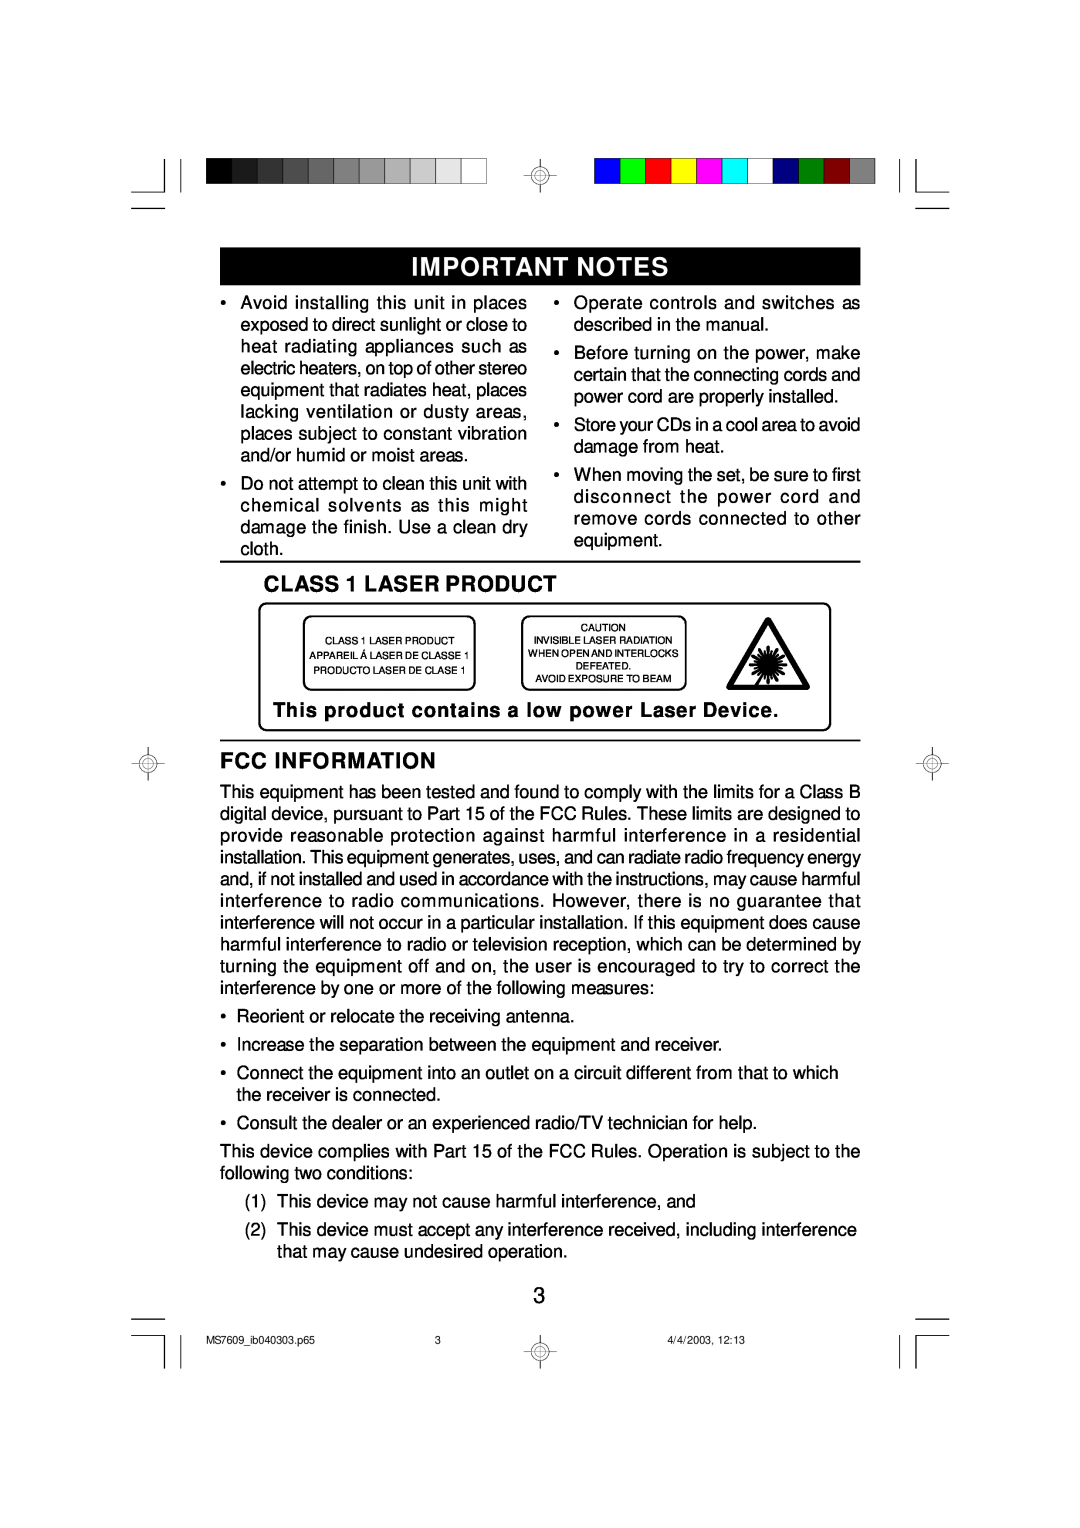 Emerson MS7609 Important Notes, CLASS 1 LASER PRODUCT, Fcc Information, This product contains a low power Laser Device 